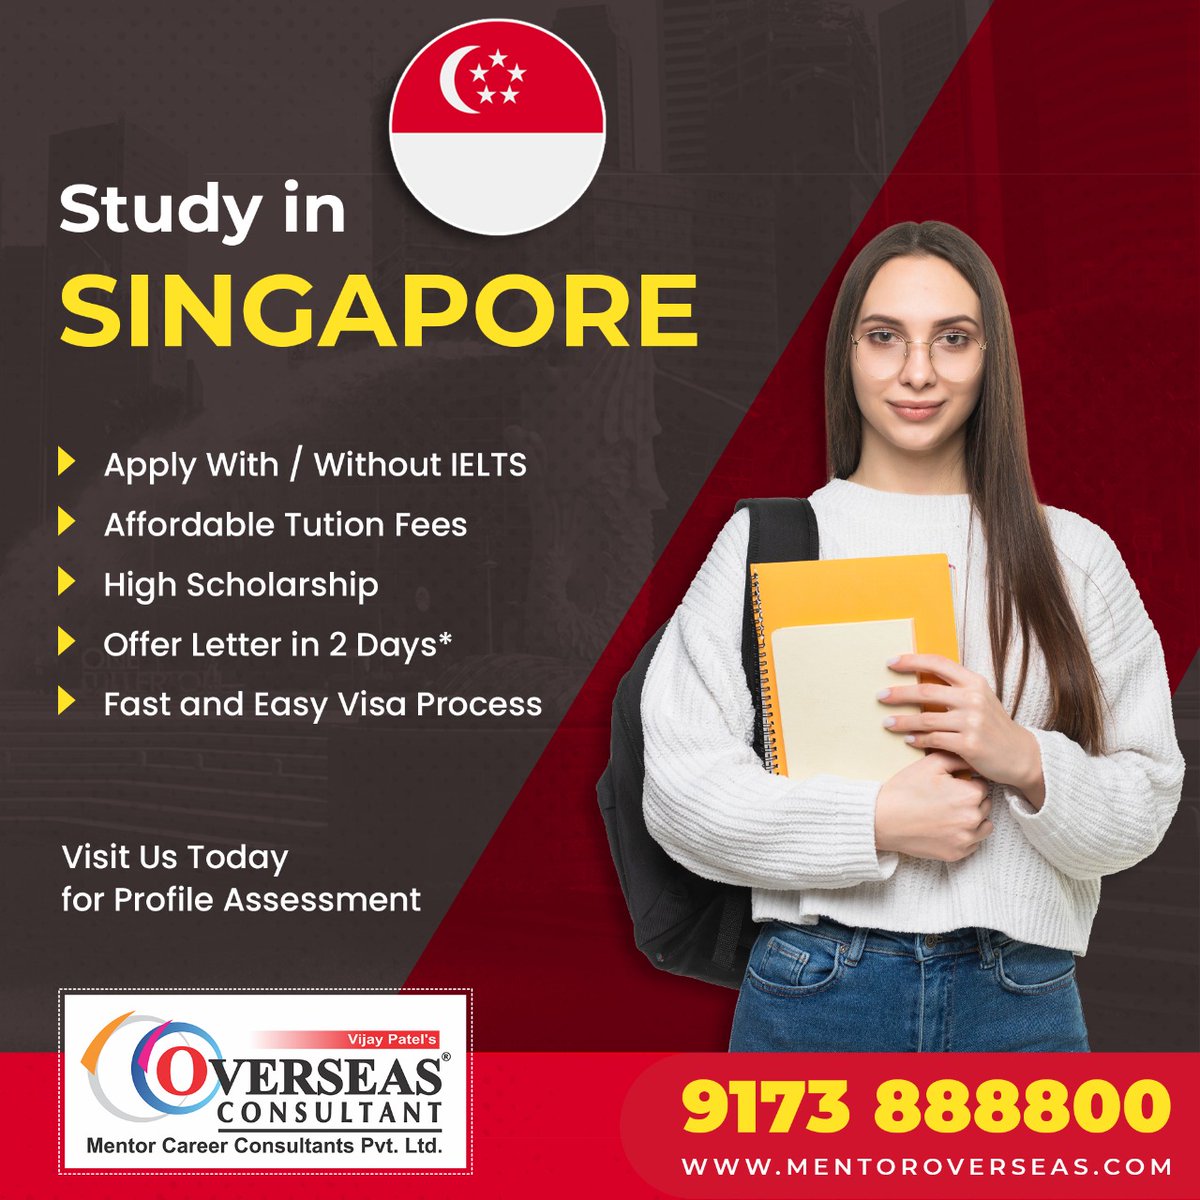 Study in SINGAPORE !

Apply Today for April / May 2023 Intake 

bit.ly/2W8tRYW

#mentoroverseas #studyabroad #foreigneducation #overseaseducation #studentvisa #singapore #studyinsingapore🇸🇬